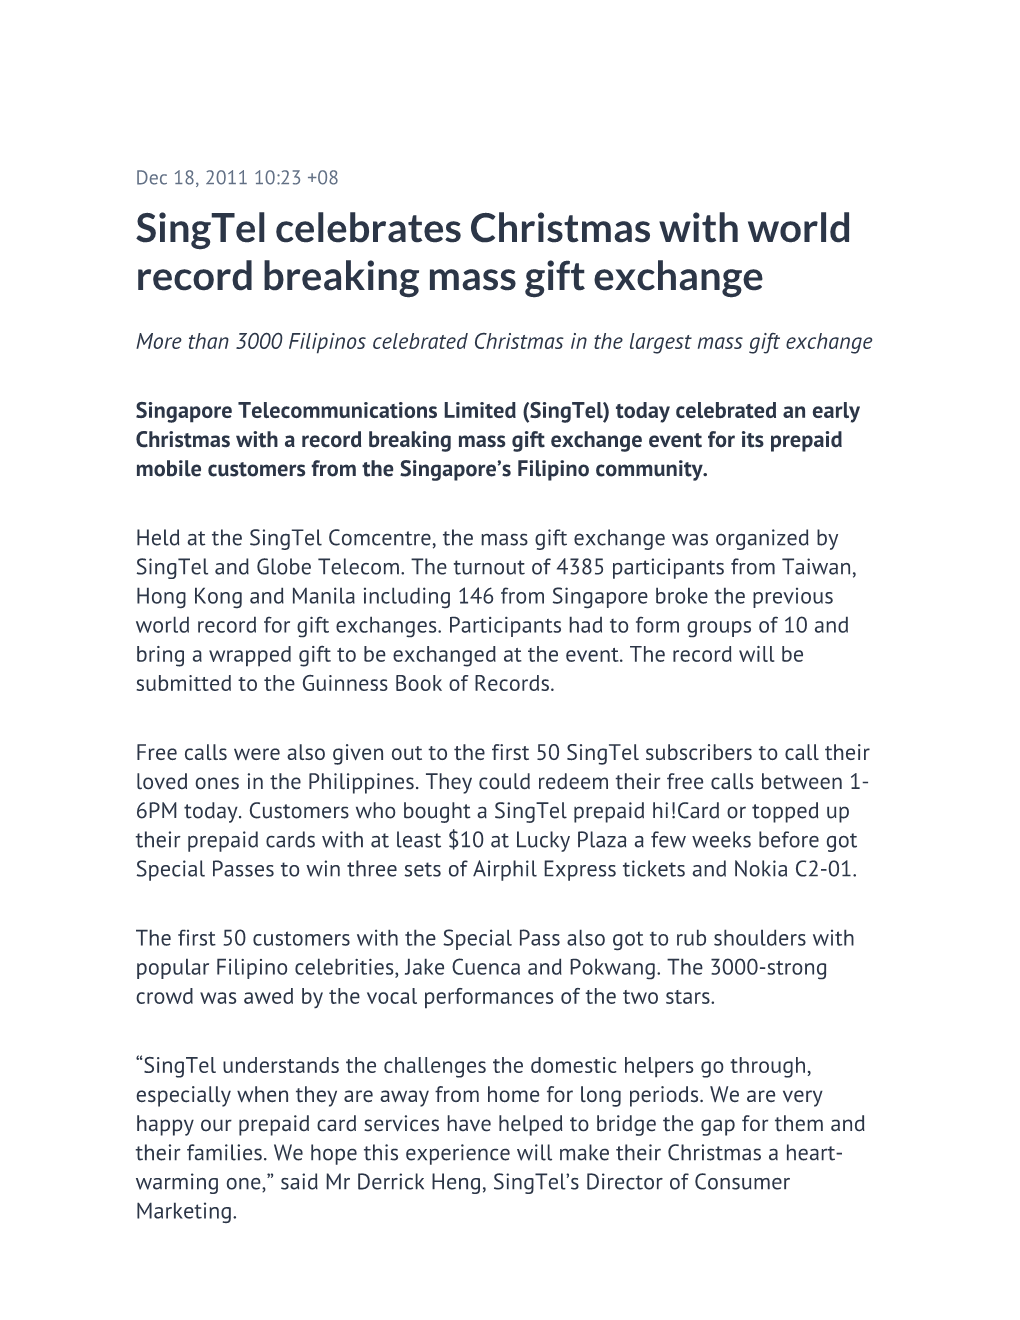 Singtel Celebrates Christmas with World Record Breaking Mass Gift Exchange